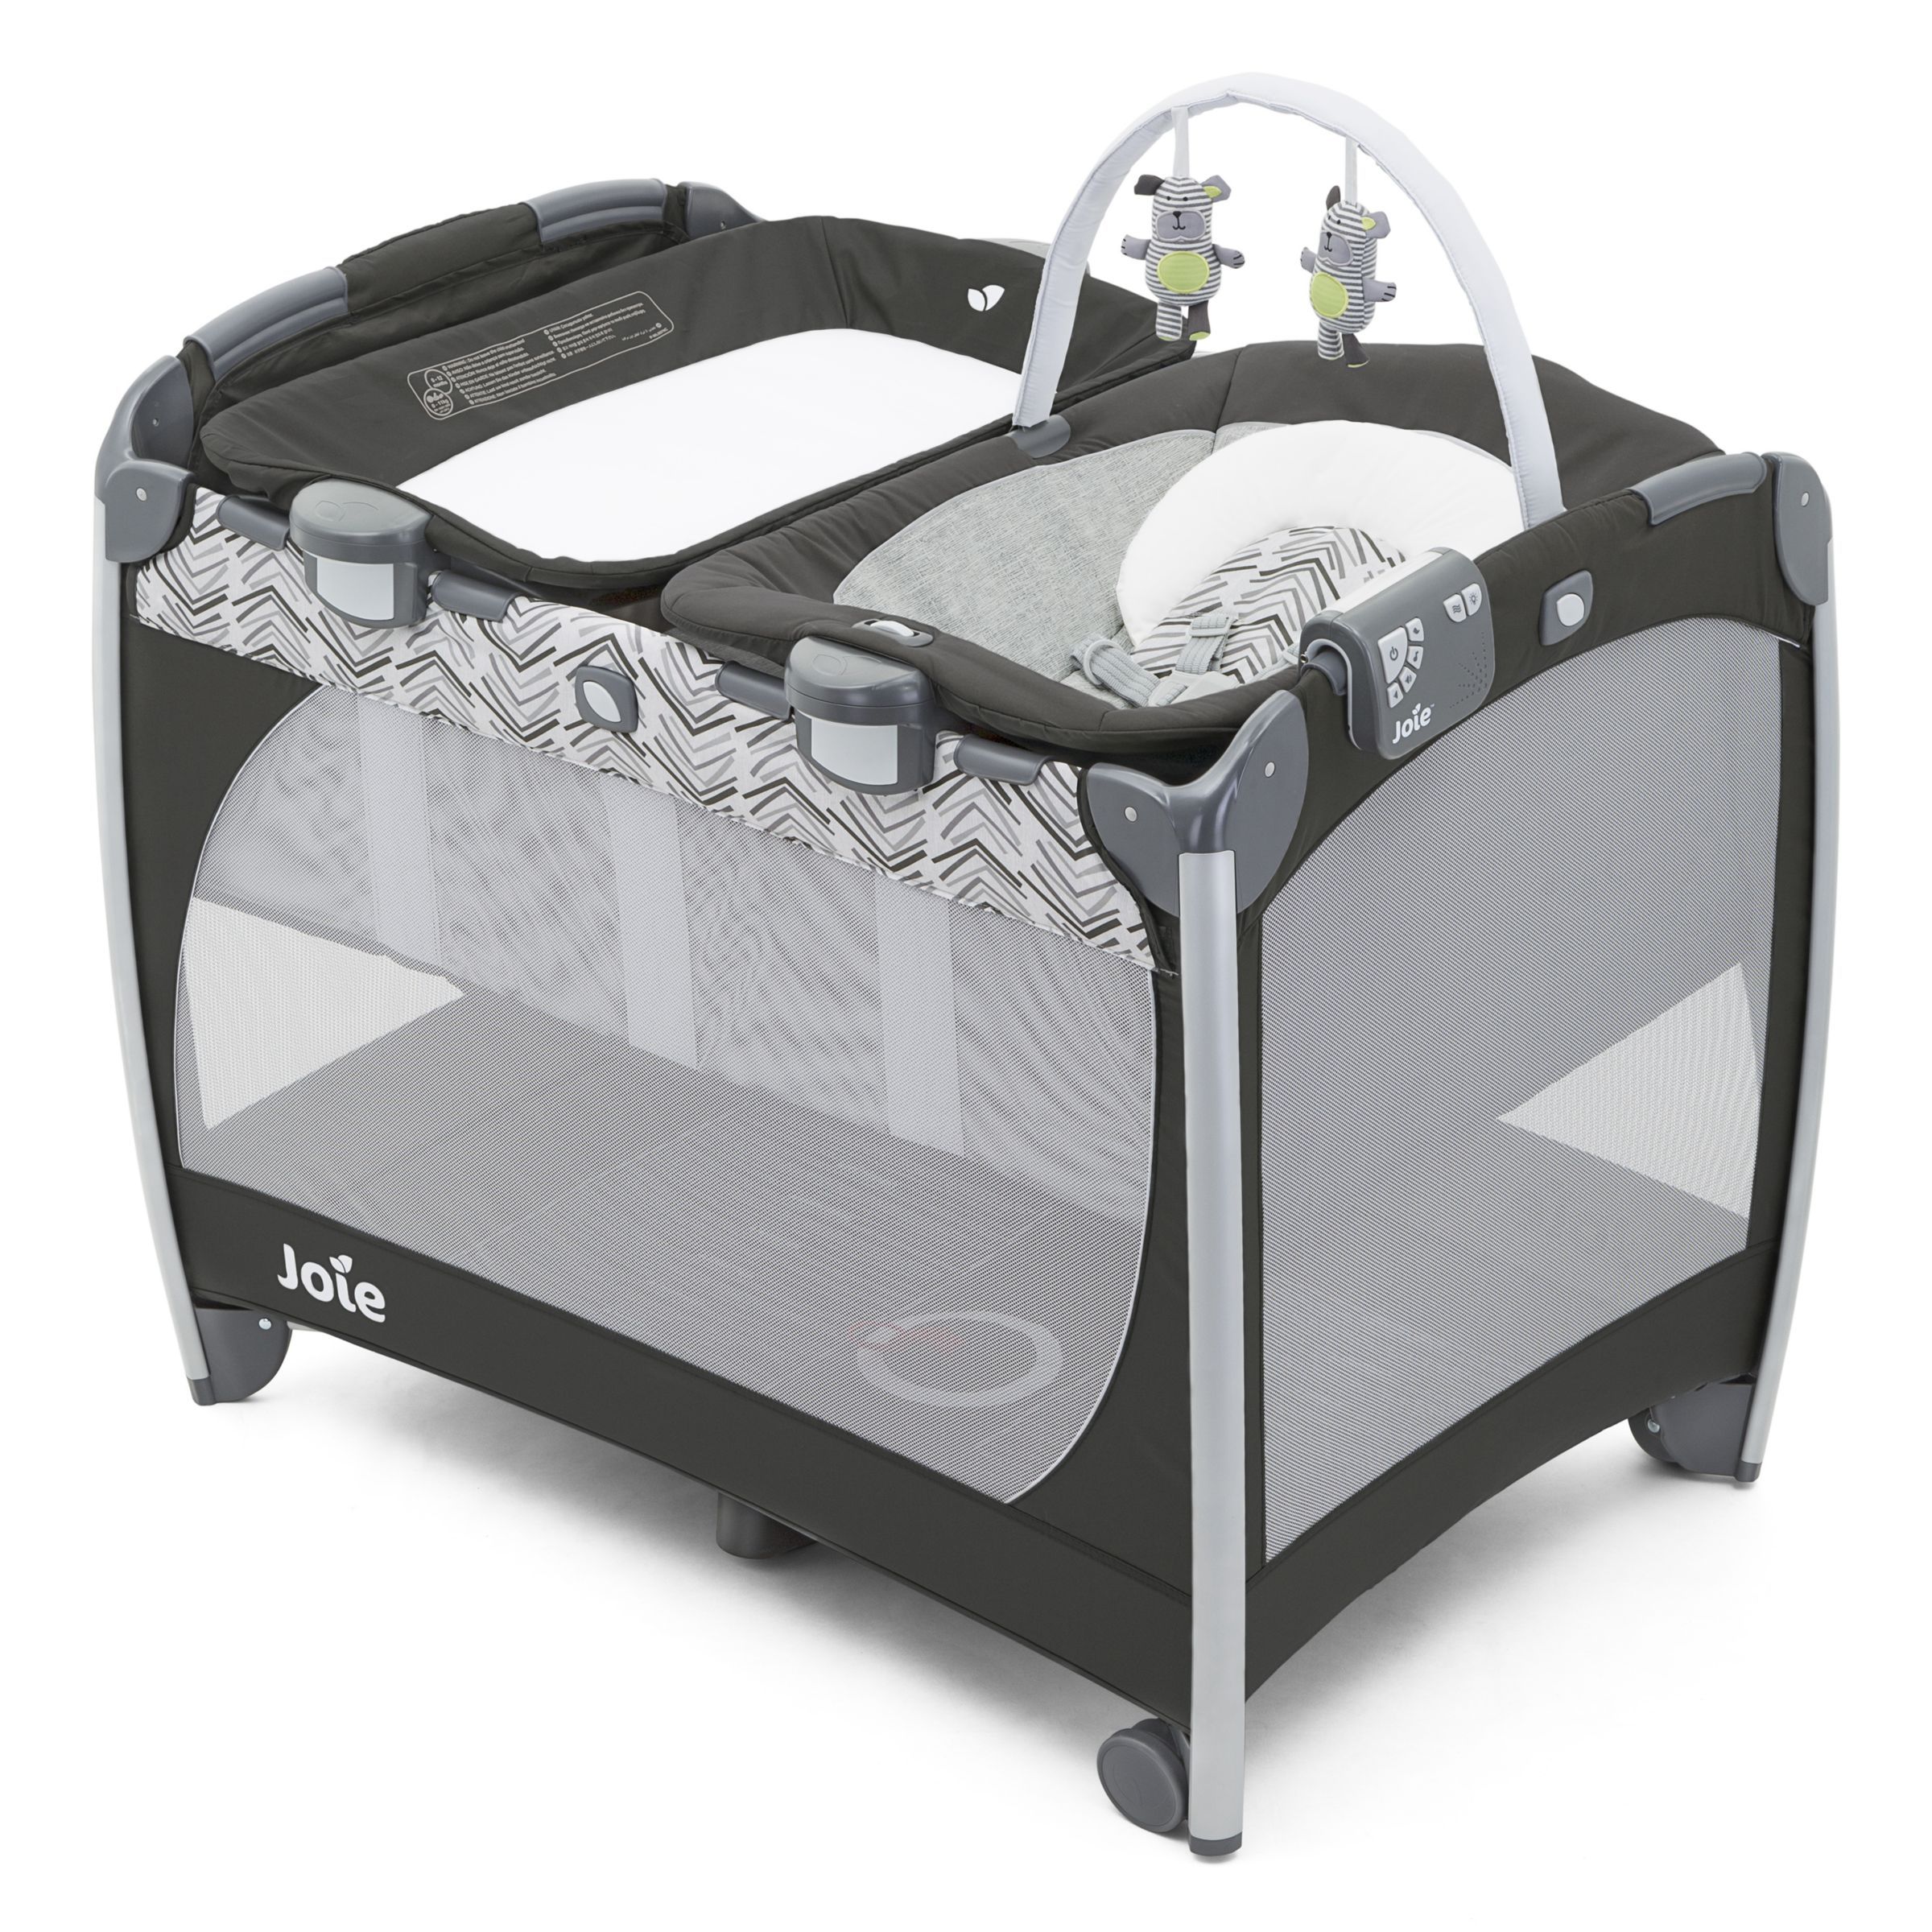 Joie Excursion Change & Bounce Travel Cot, Abstract Arrows